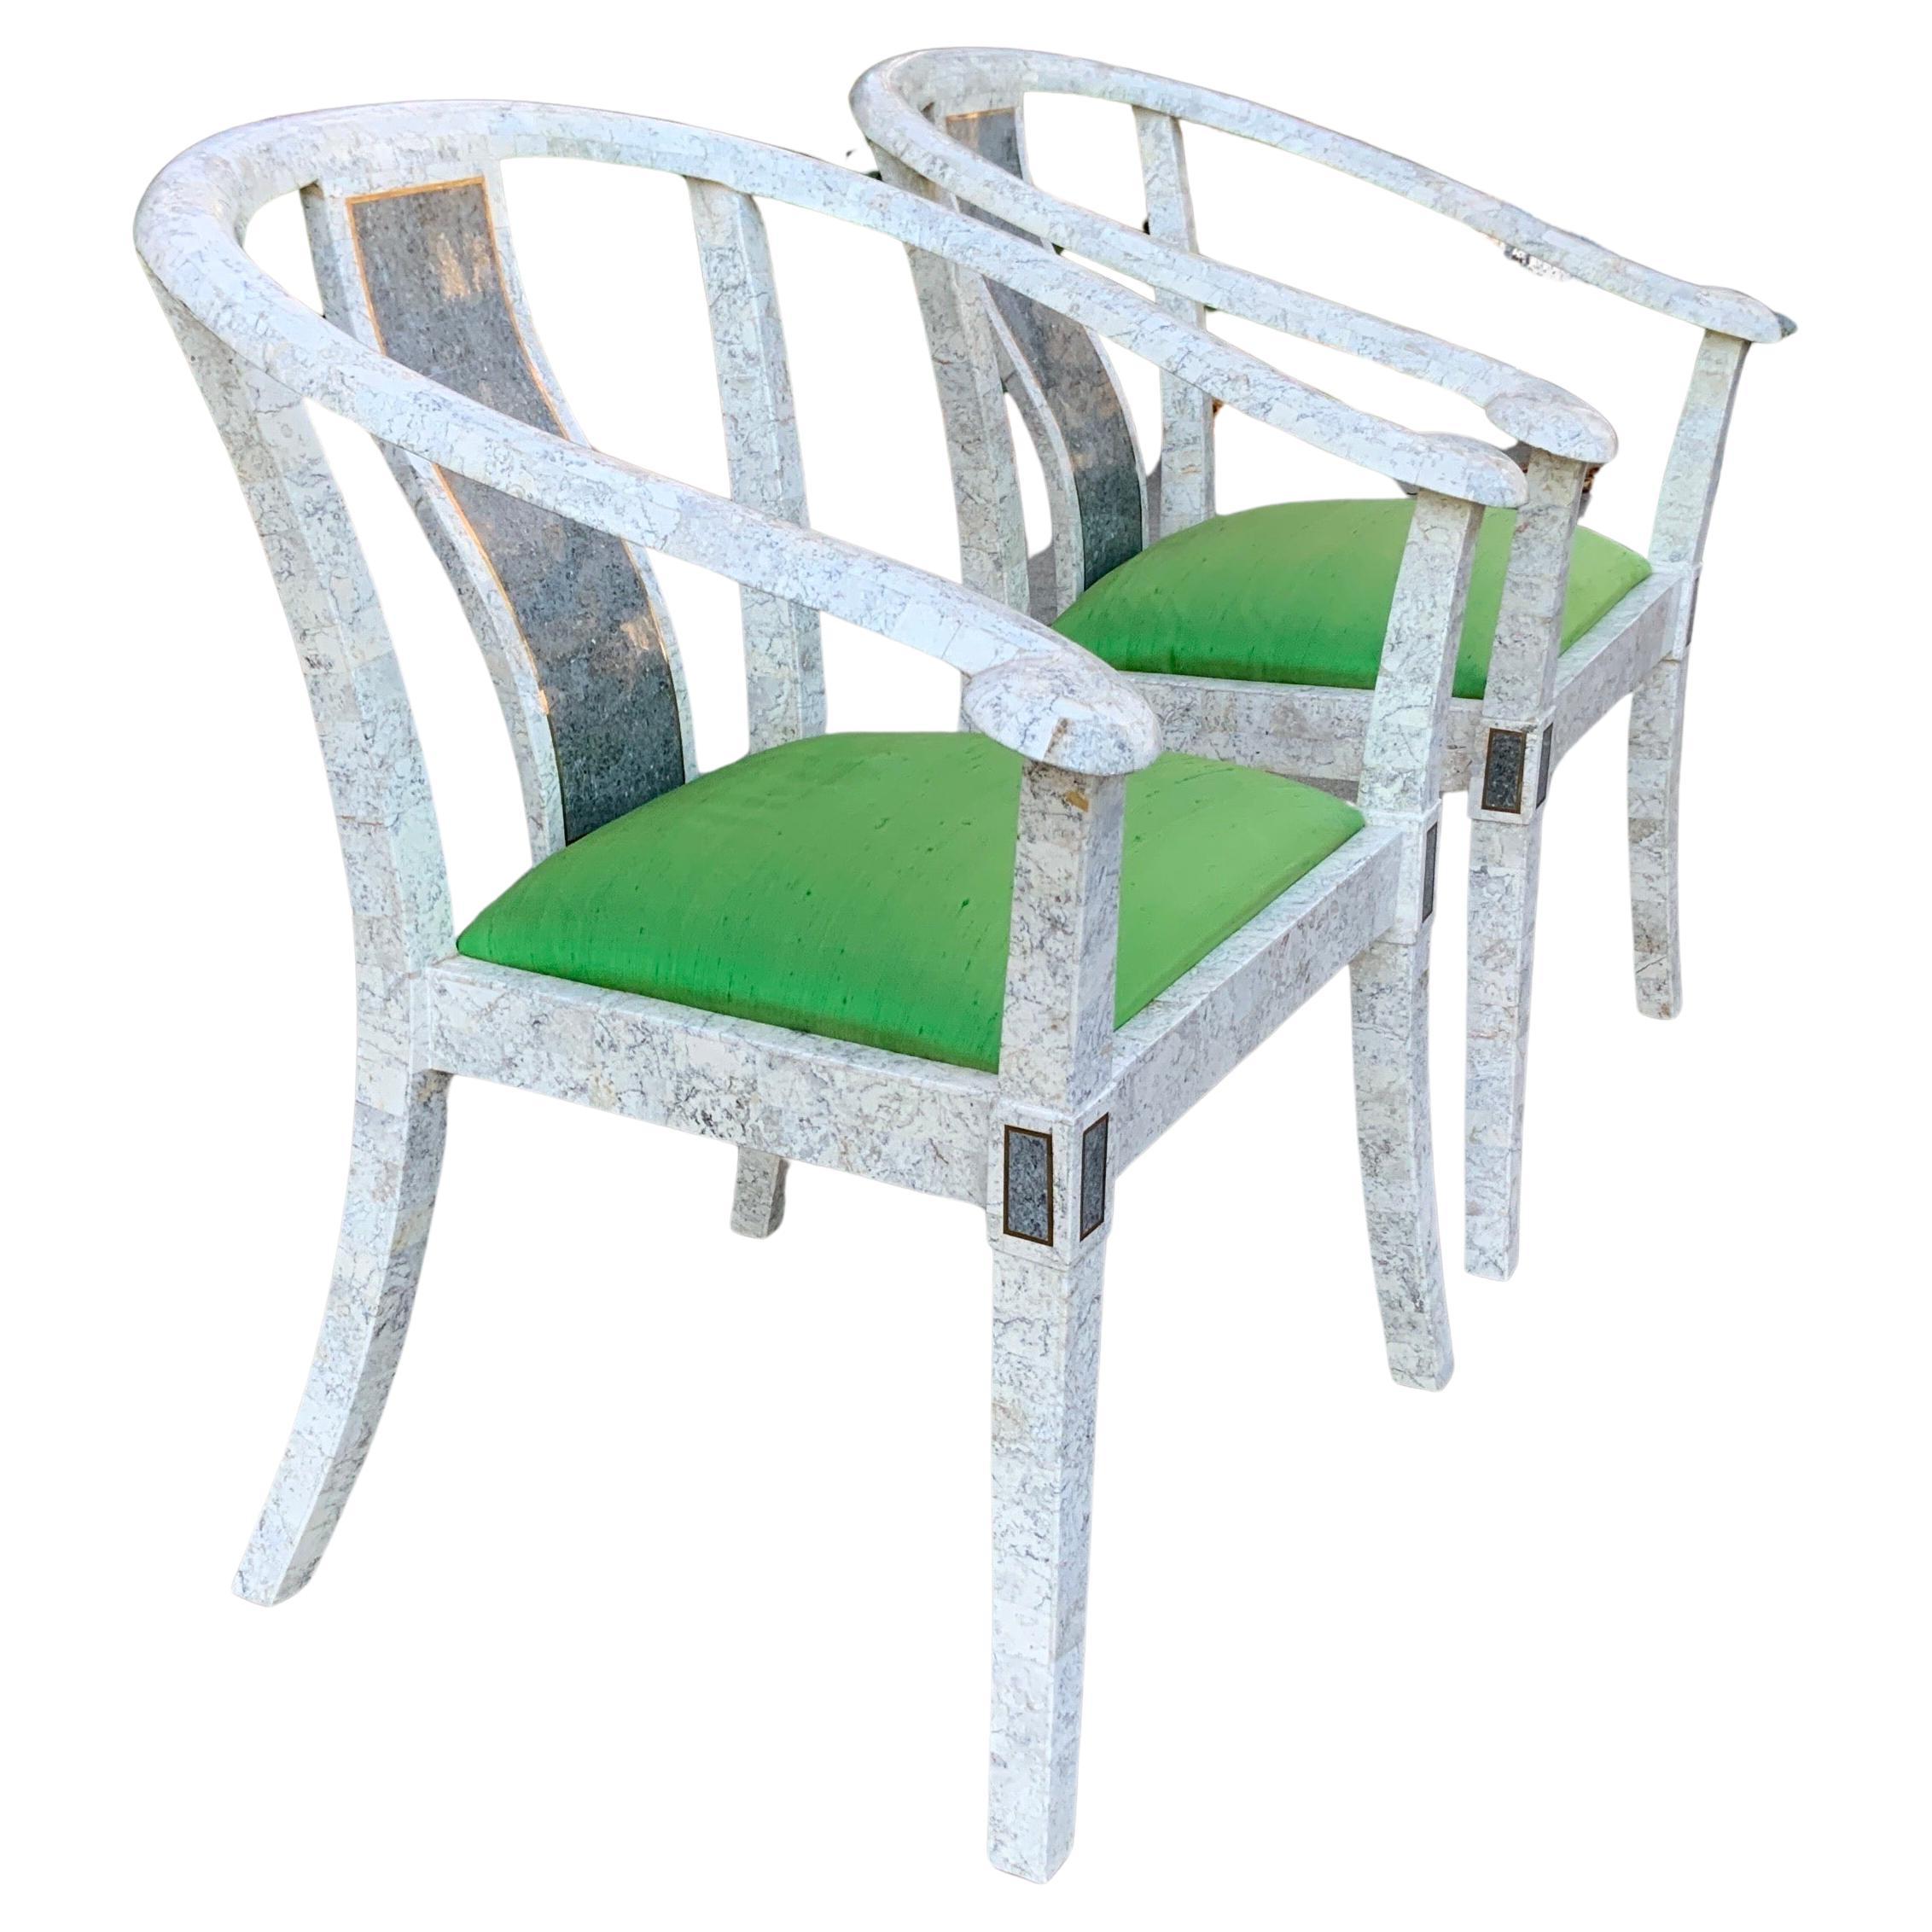 A pair of vintage Maitland Smith tessellated chairs. These beautiful off white stone with green upholstered seats are very sturdy and feature brass inlay and gorgeous green silk covered seats. These impressive chairs with their fantastic design